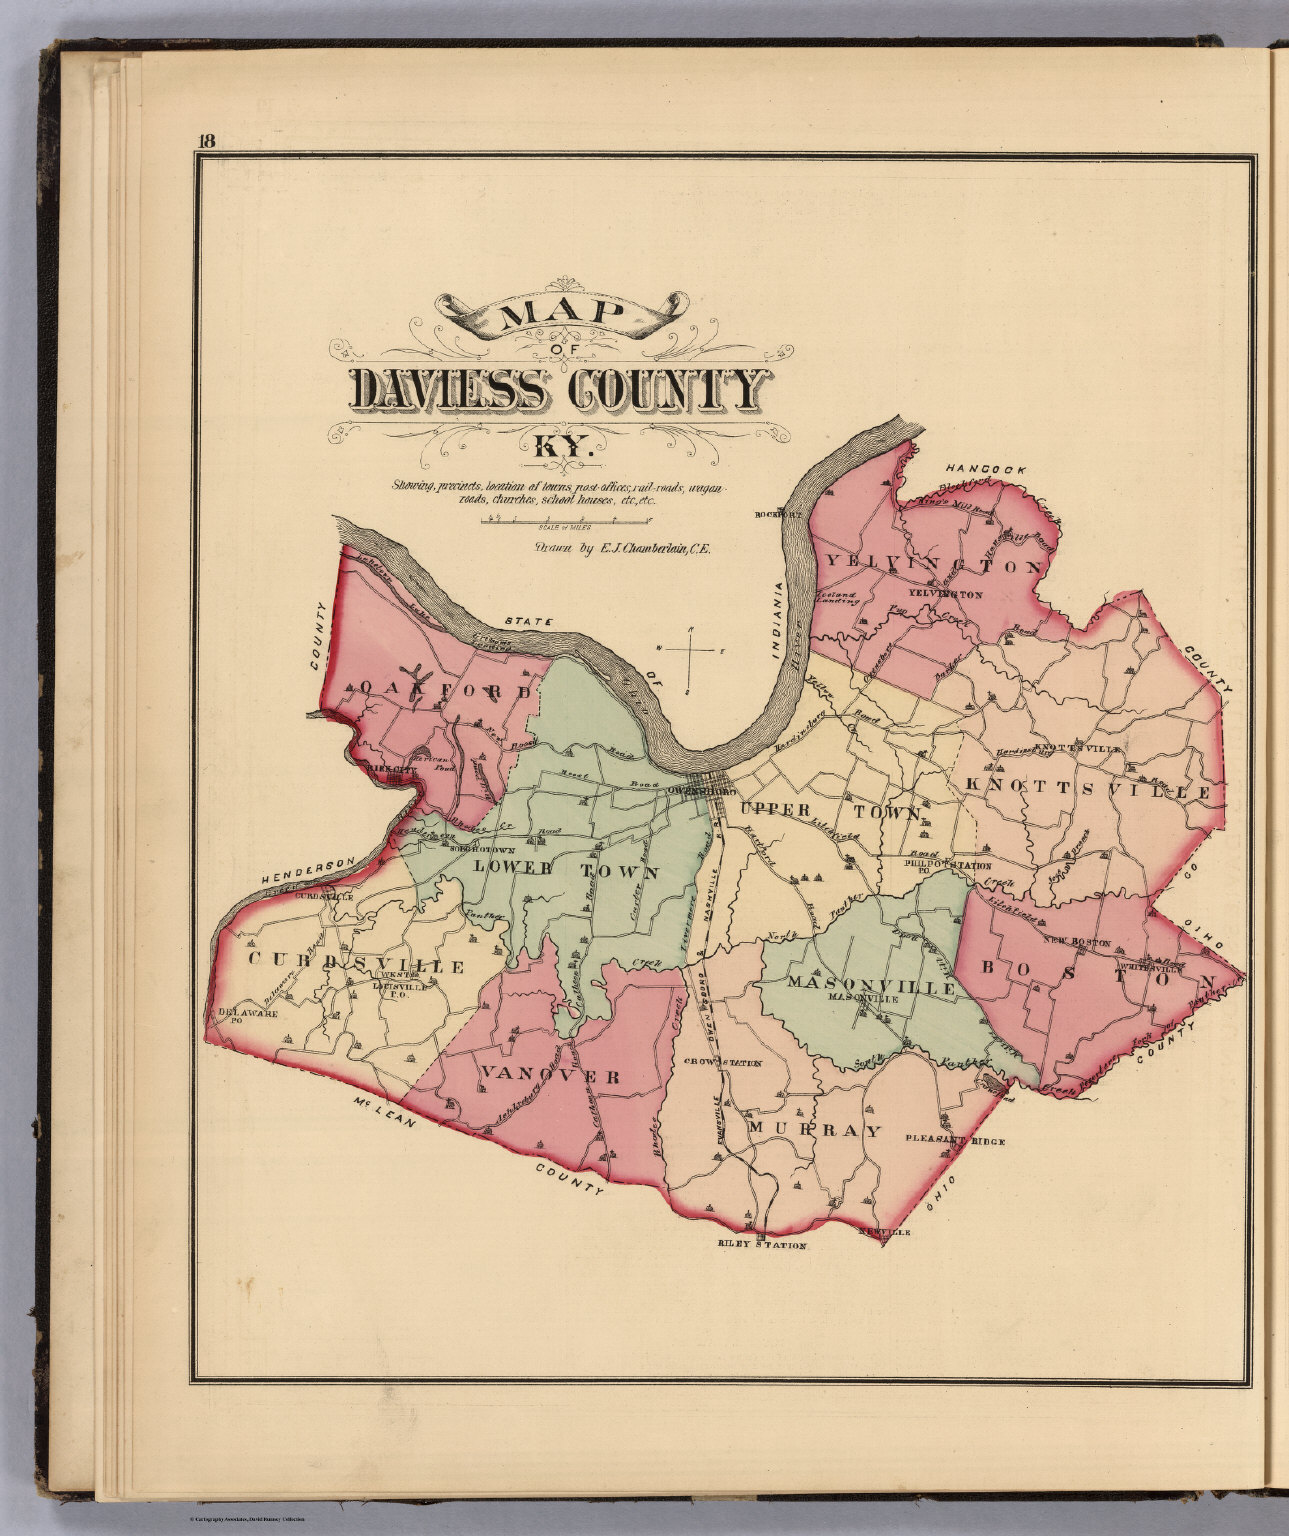 Daviess County, Kentucky. David Rumsey Historical Map Collection